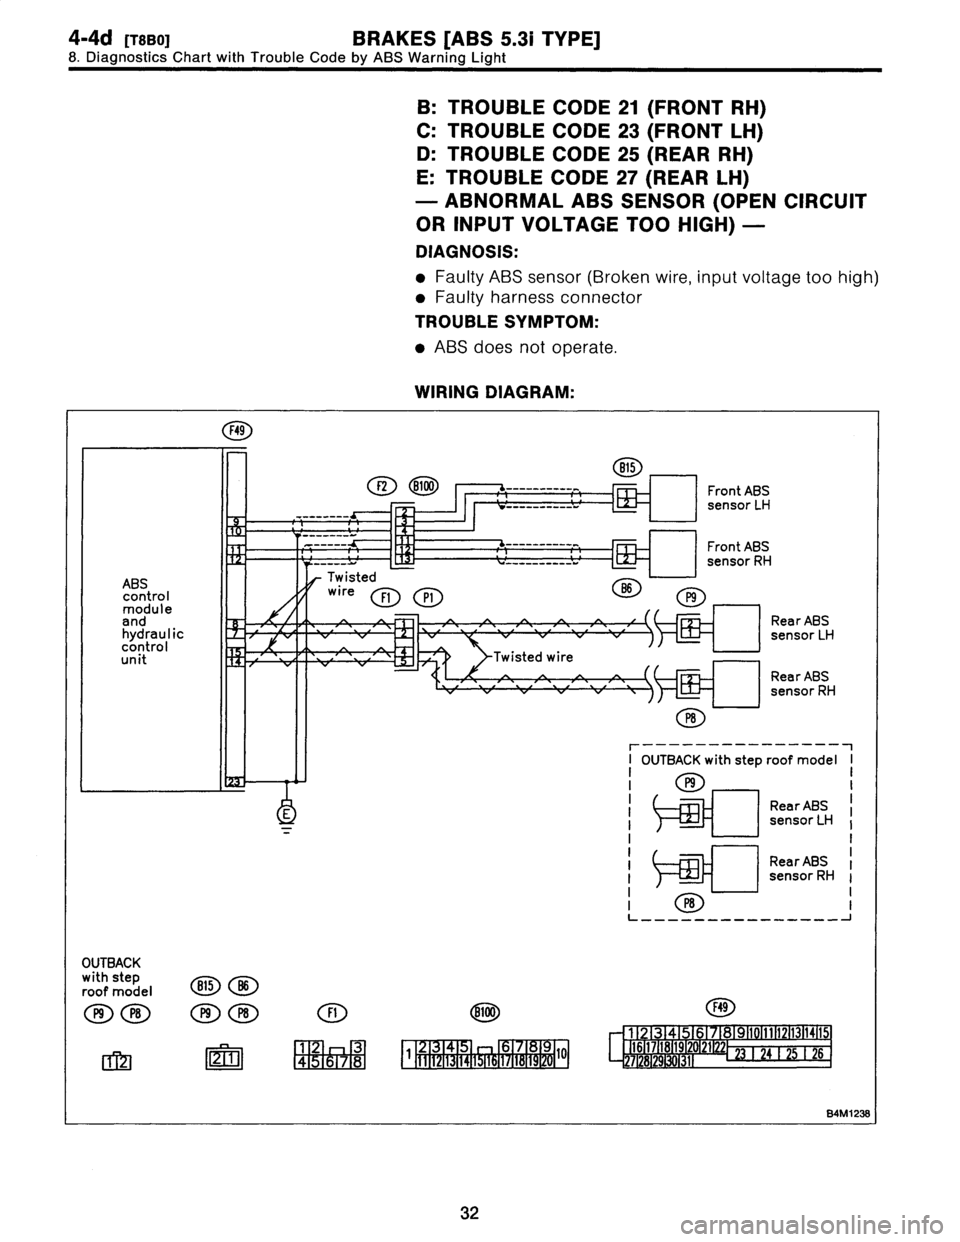 SUBARU LEGACY 1997  Service Repair Manual 
4-4d
[rsBO]
BRAKES
[ABS
5
.31
TYPE]

8
.
Diagnostics
Chart
with
Trouble
Code
by
ABS
Warning
Light

B
:
TROUBLE
CODE
21
(FRONT
RH)

C
:
TROUBLE
CODE
23
(FRONT
LH)

D
:
TROUBLE
CODE
25
(REAR
RH)

E
:
T